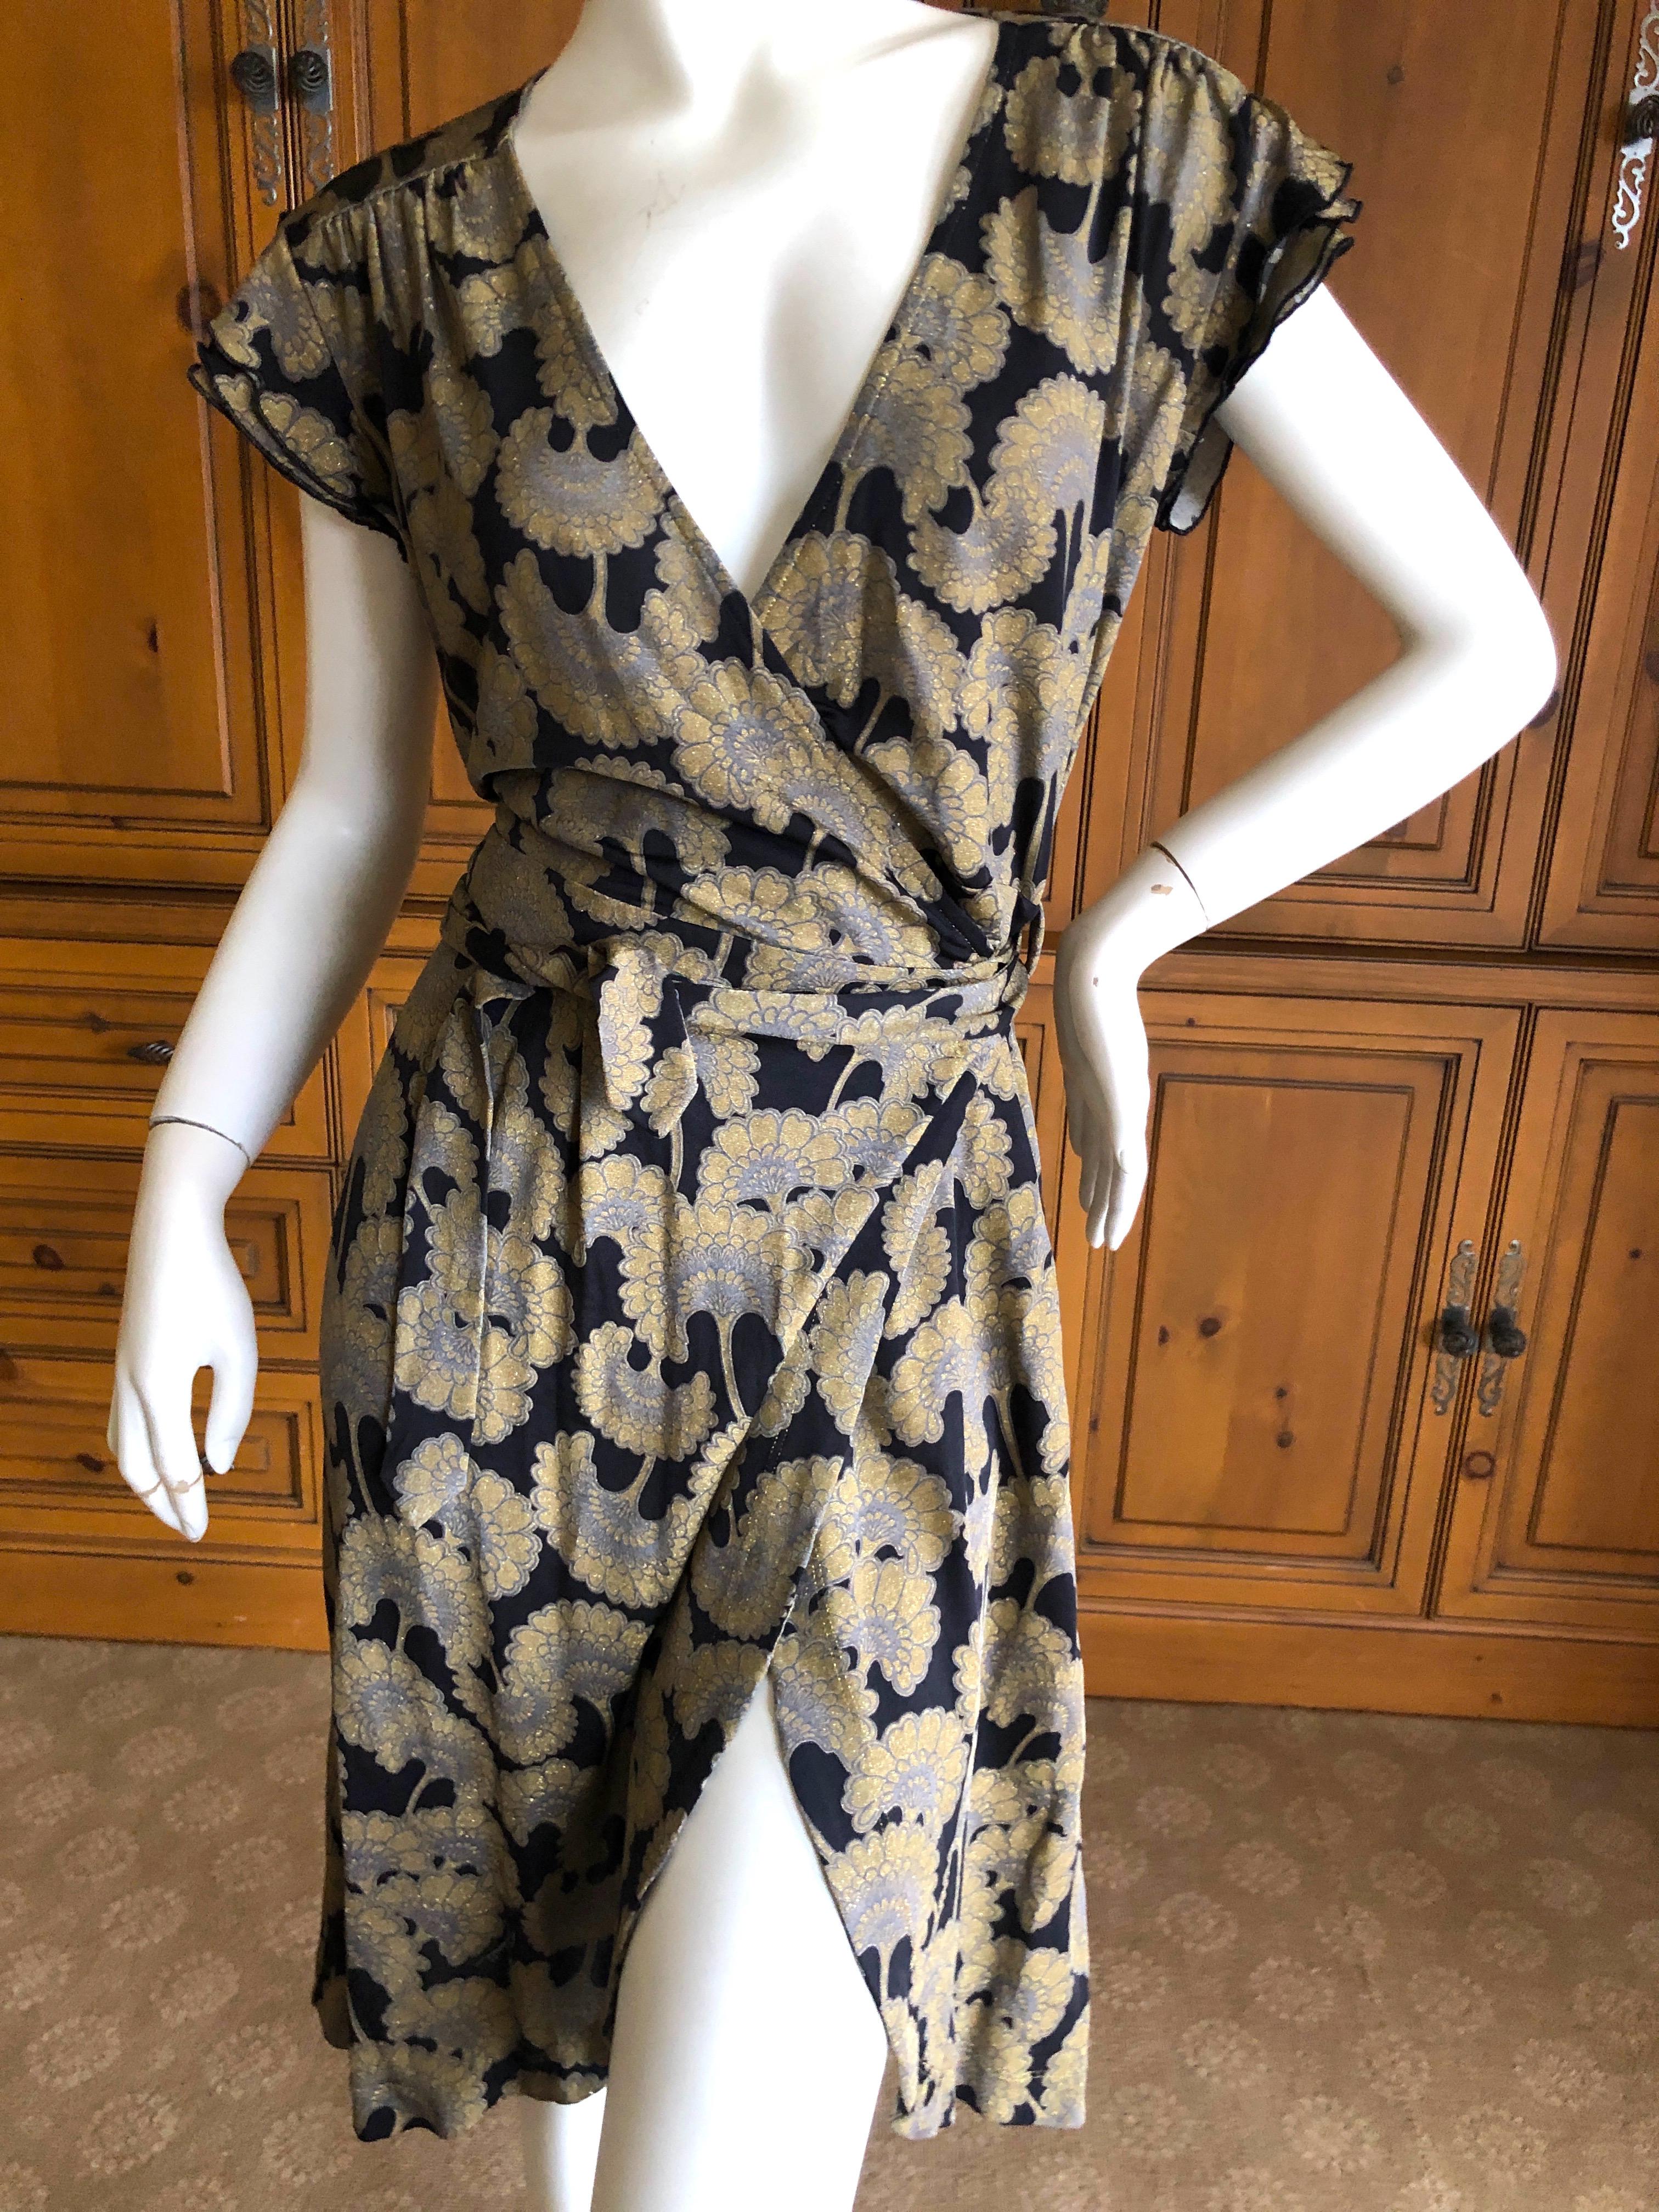 Just Cavalli Roberto Cavalli Sweet Golden Japanese Ginko Leaf Print Mini Dress.
New with tags
This is so pretty, the photos don't do it justice. 
Size 42 There is a lot of stretch
Bust 38